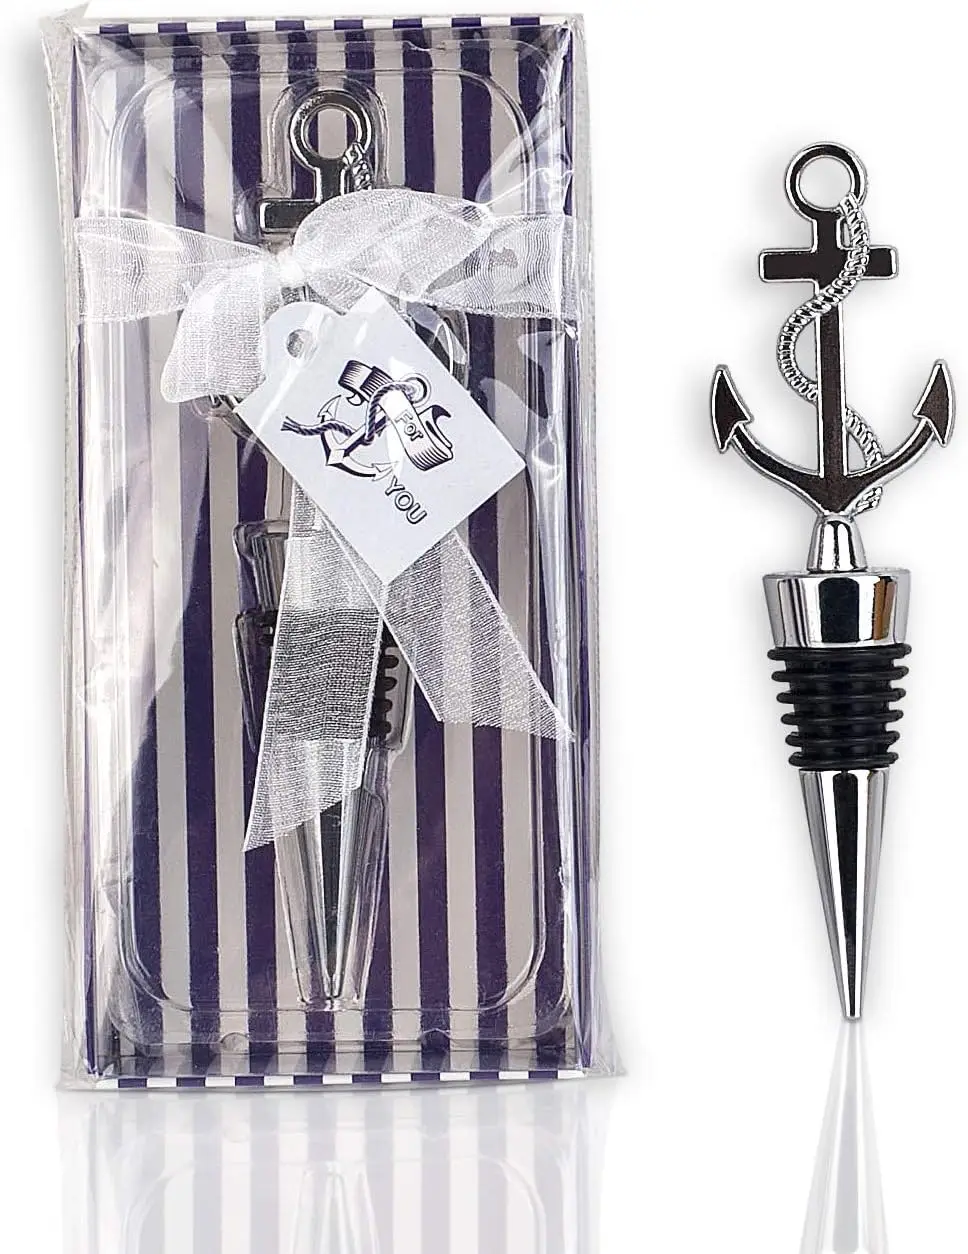 

Ship's Anchor Wine Bottle Opener Wine Preservation Stopper - Party Favors, Wedding Favor Bridal Shower,Bar, Birthday Party（20PC）